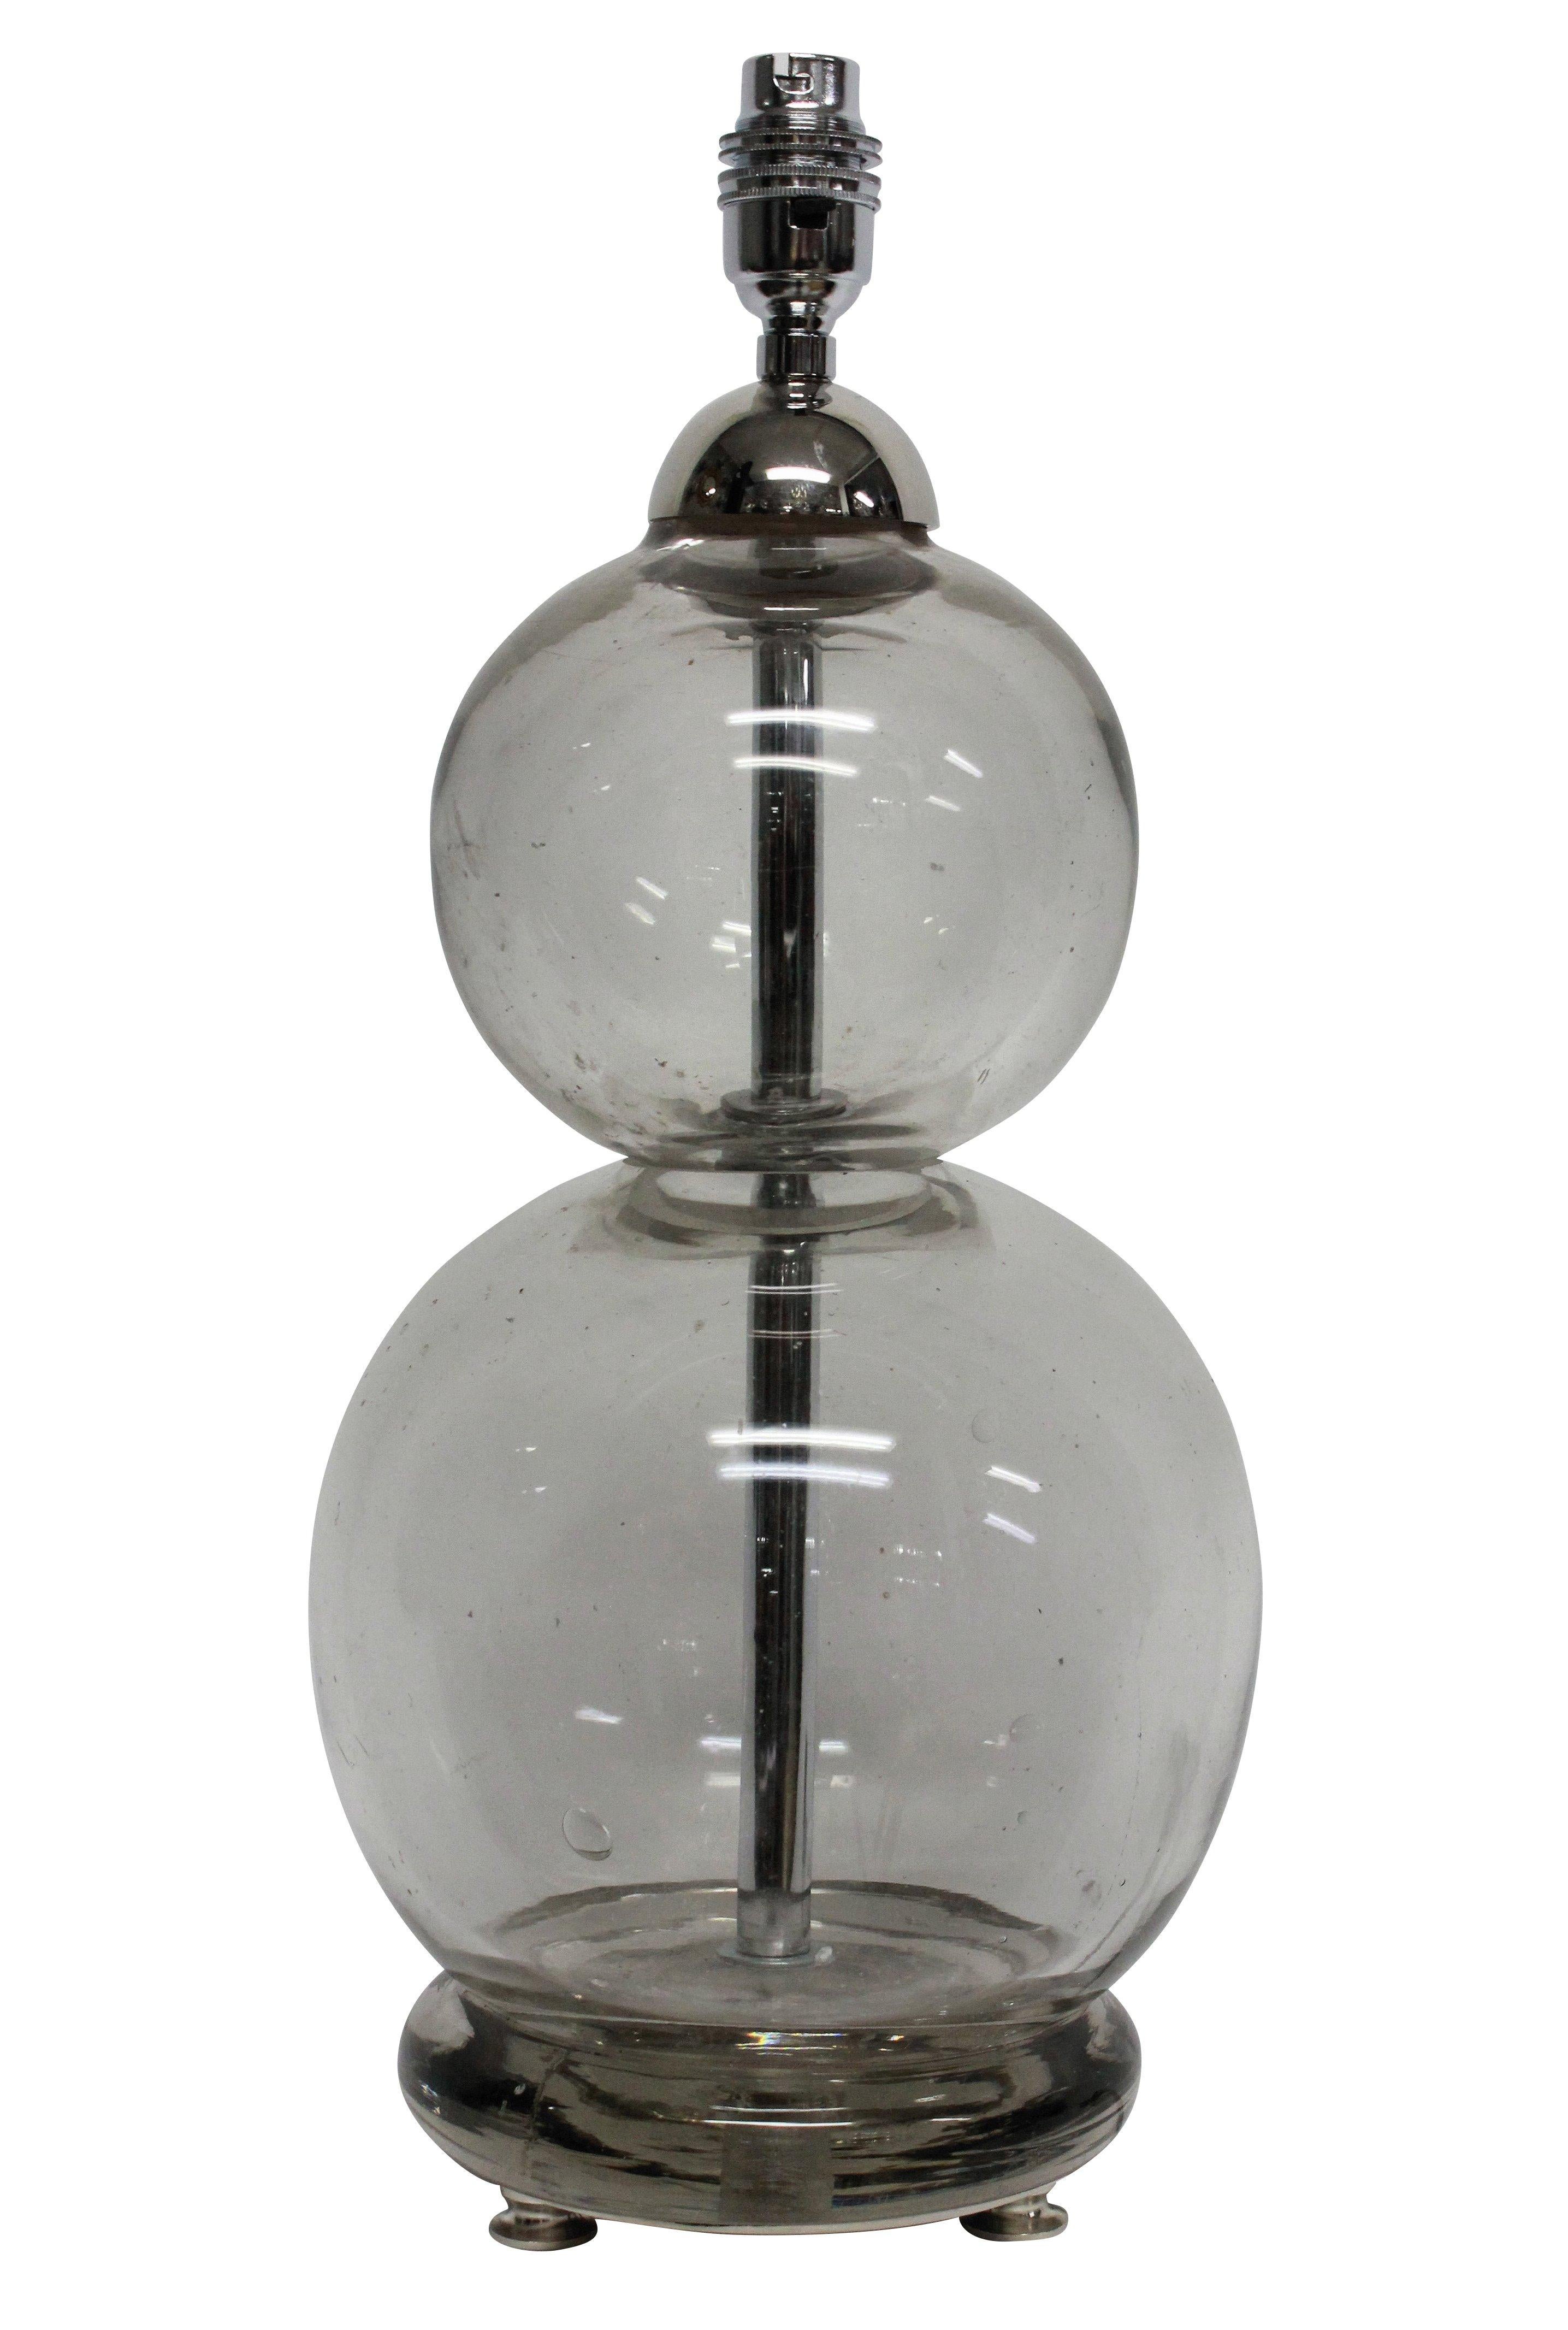 A pair of lamps made out of converted French 'Seltzogene' soda siphons. The thick hand blown glass has a nice grey tint. The fittings are silver plate.